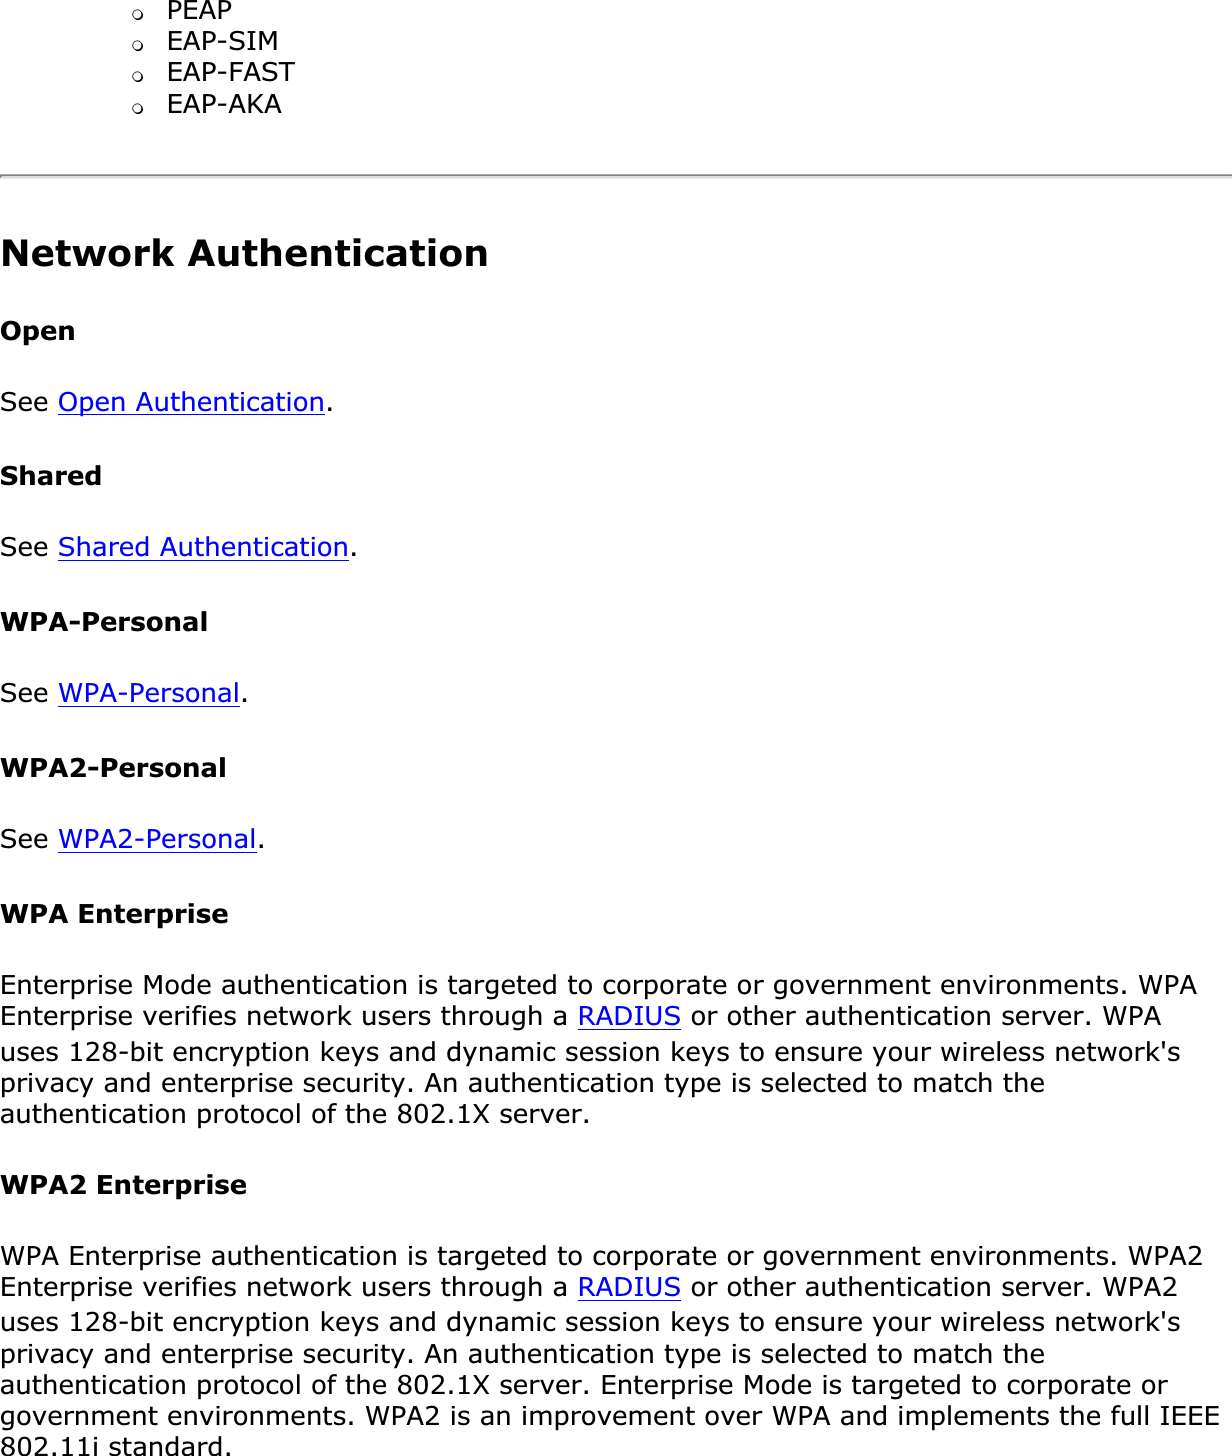 ❍PEAP❍EAP-SIM❍EAP-FAST❍EAP-AKANetwork Authentication OpenSee Open Authentication.SharedSee Shared Authentication.WPA-PersonalSee WPA-Personal.WPA2-PersonalSee WPA2-Personal.WPA EnterpriseEnterprise Mode authentication is targeted to corporate or government environments. WPA Enterprise verifies network users through a RADIUS or other authentication server. WPA uses 128-bit encryption keys and dynamic session keys to ensure your wireless network&apos;s privacy and enterprise security. An authentication type is selected to match the authentication protocol of the 802.1X server.WPA2 EnterpriseWPA Enterprise authentication is targeted to corporate or government environments. WPA2 Enterprise verifies network users through a RADIUS or other authentication server. WPA2 uses 128-bit encryption keys and dynamic session keys to ensure your wireless network&apos;s privacy and enterprise security. An authentication type is selected to match the authentication protocol of the 802.1X server. Enterprise Mode is targeted to corporate or government environments. WPA2 is an improvement over WPA and implements the full IEEE 802.11i standard.